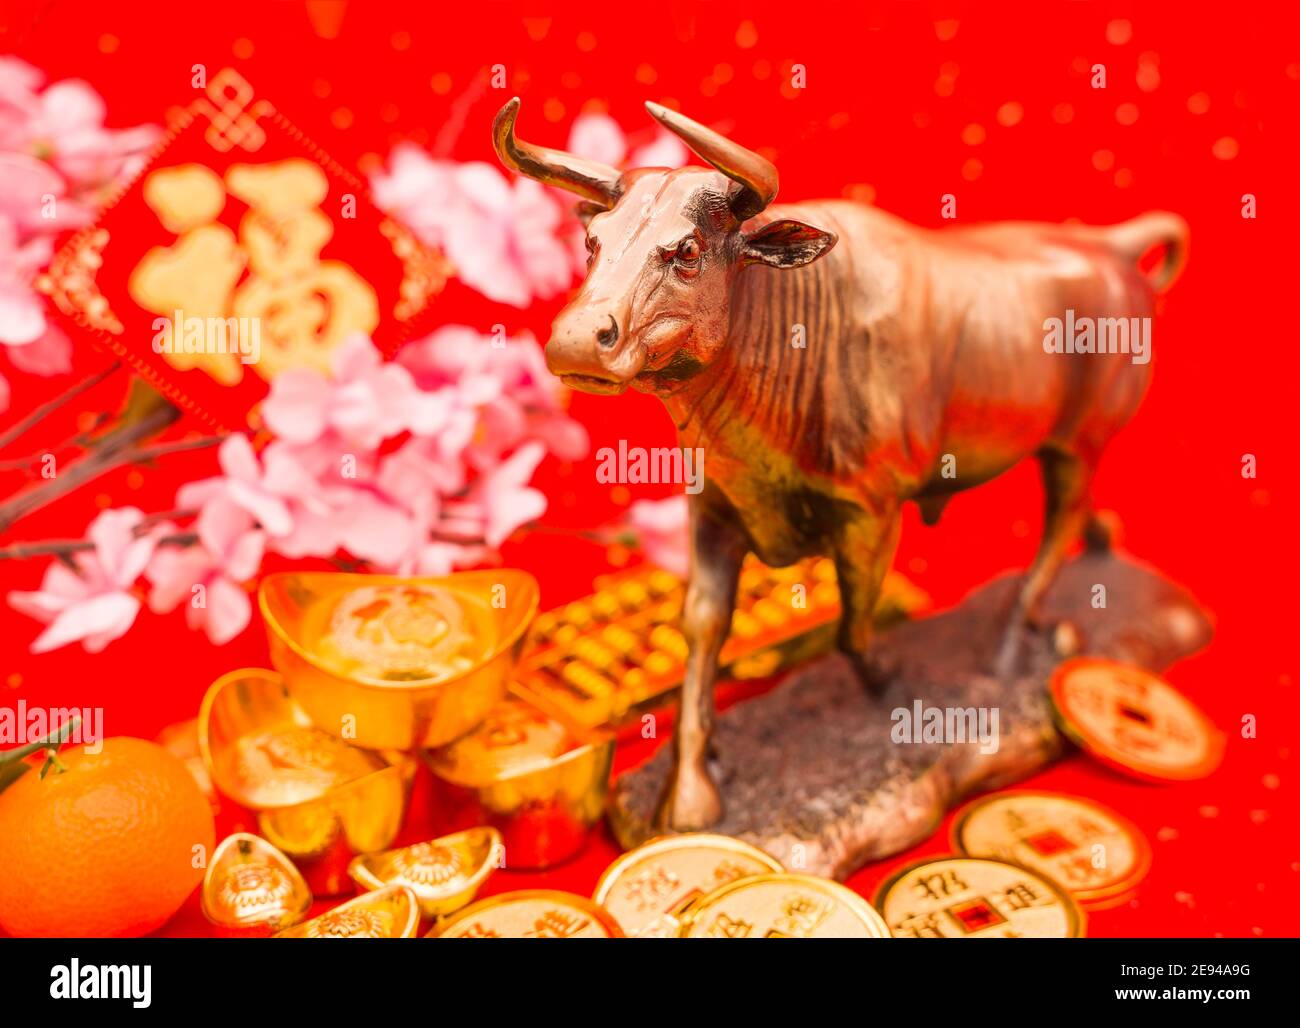 2021 is year of the ox,characters on leftside chinese wording mean